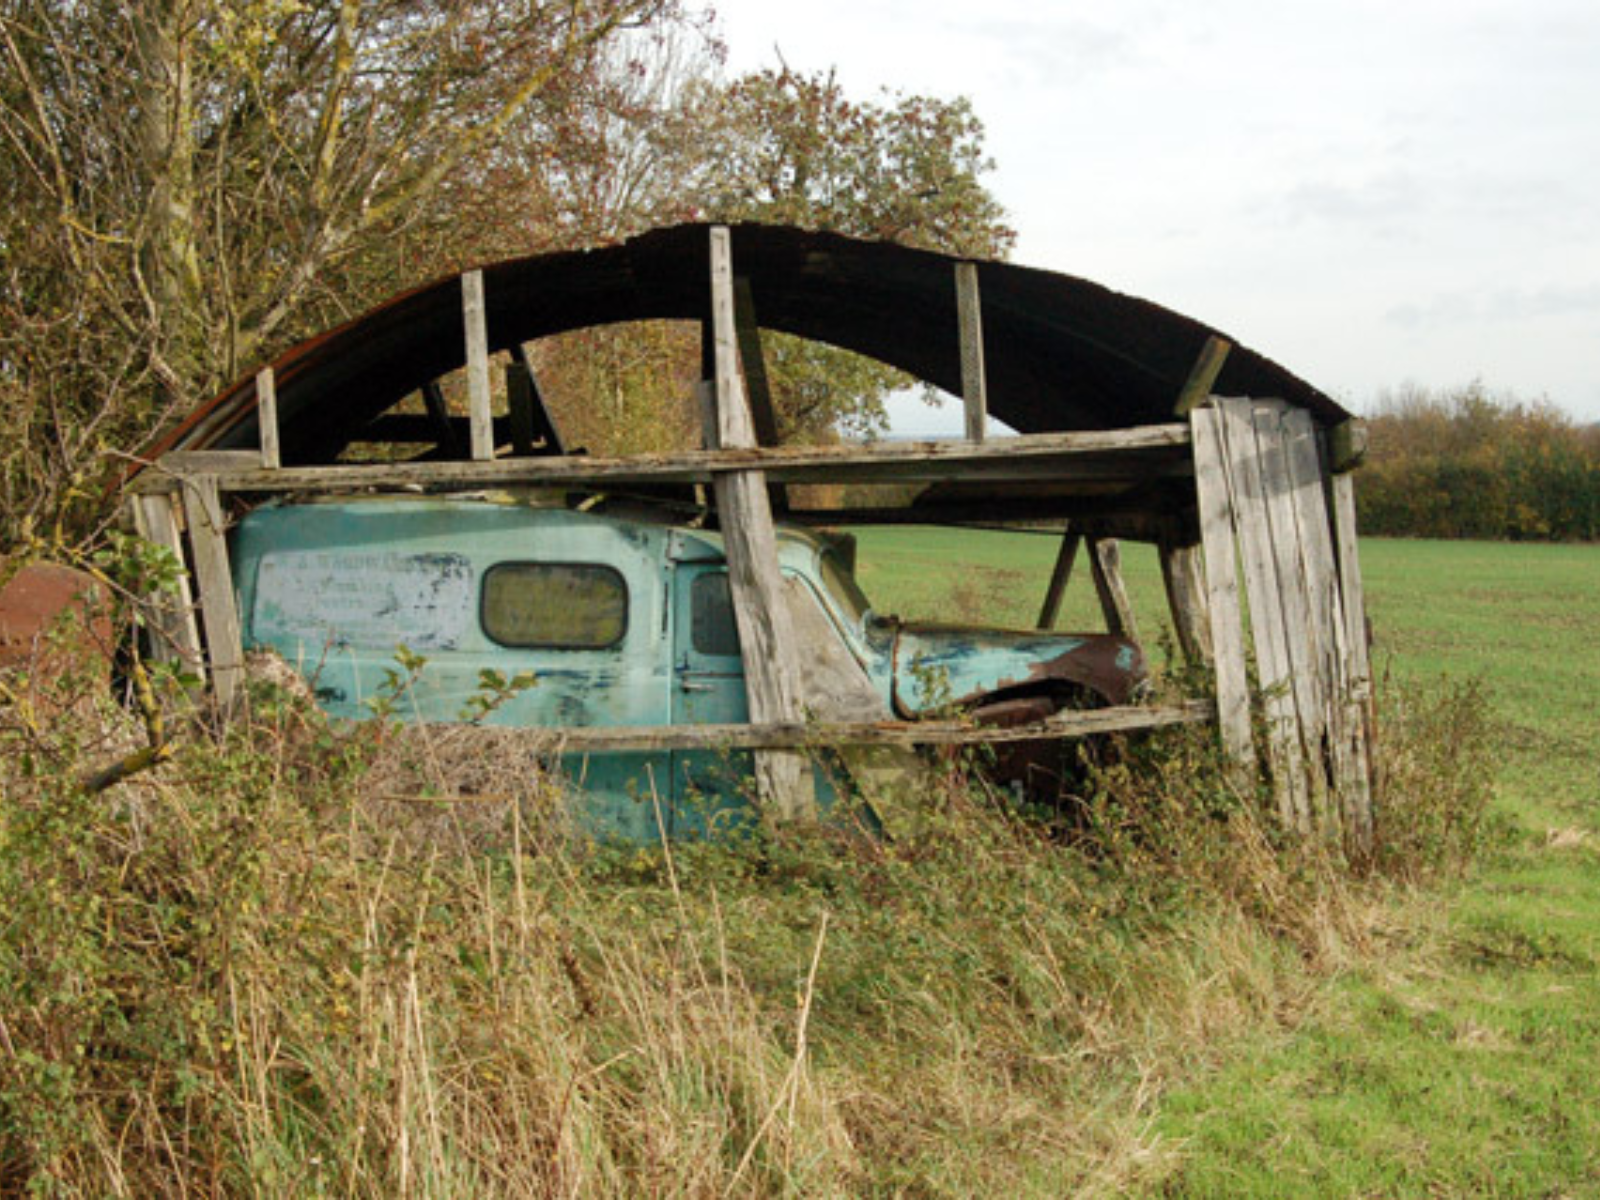 A derelict light-blue vehicle in a derelict garage that is more open than covered at this point.